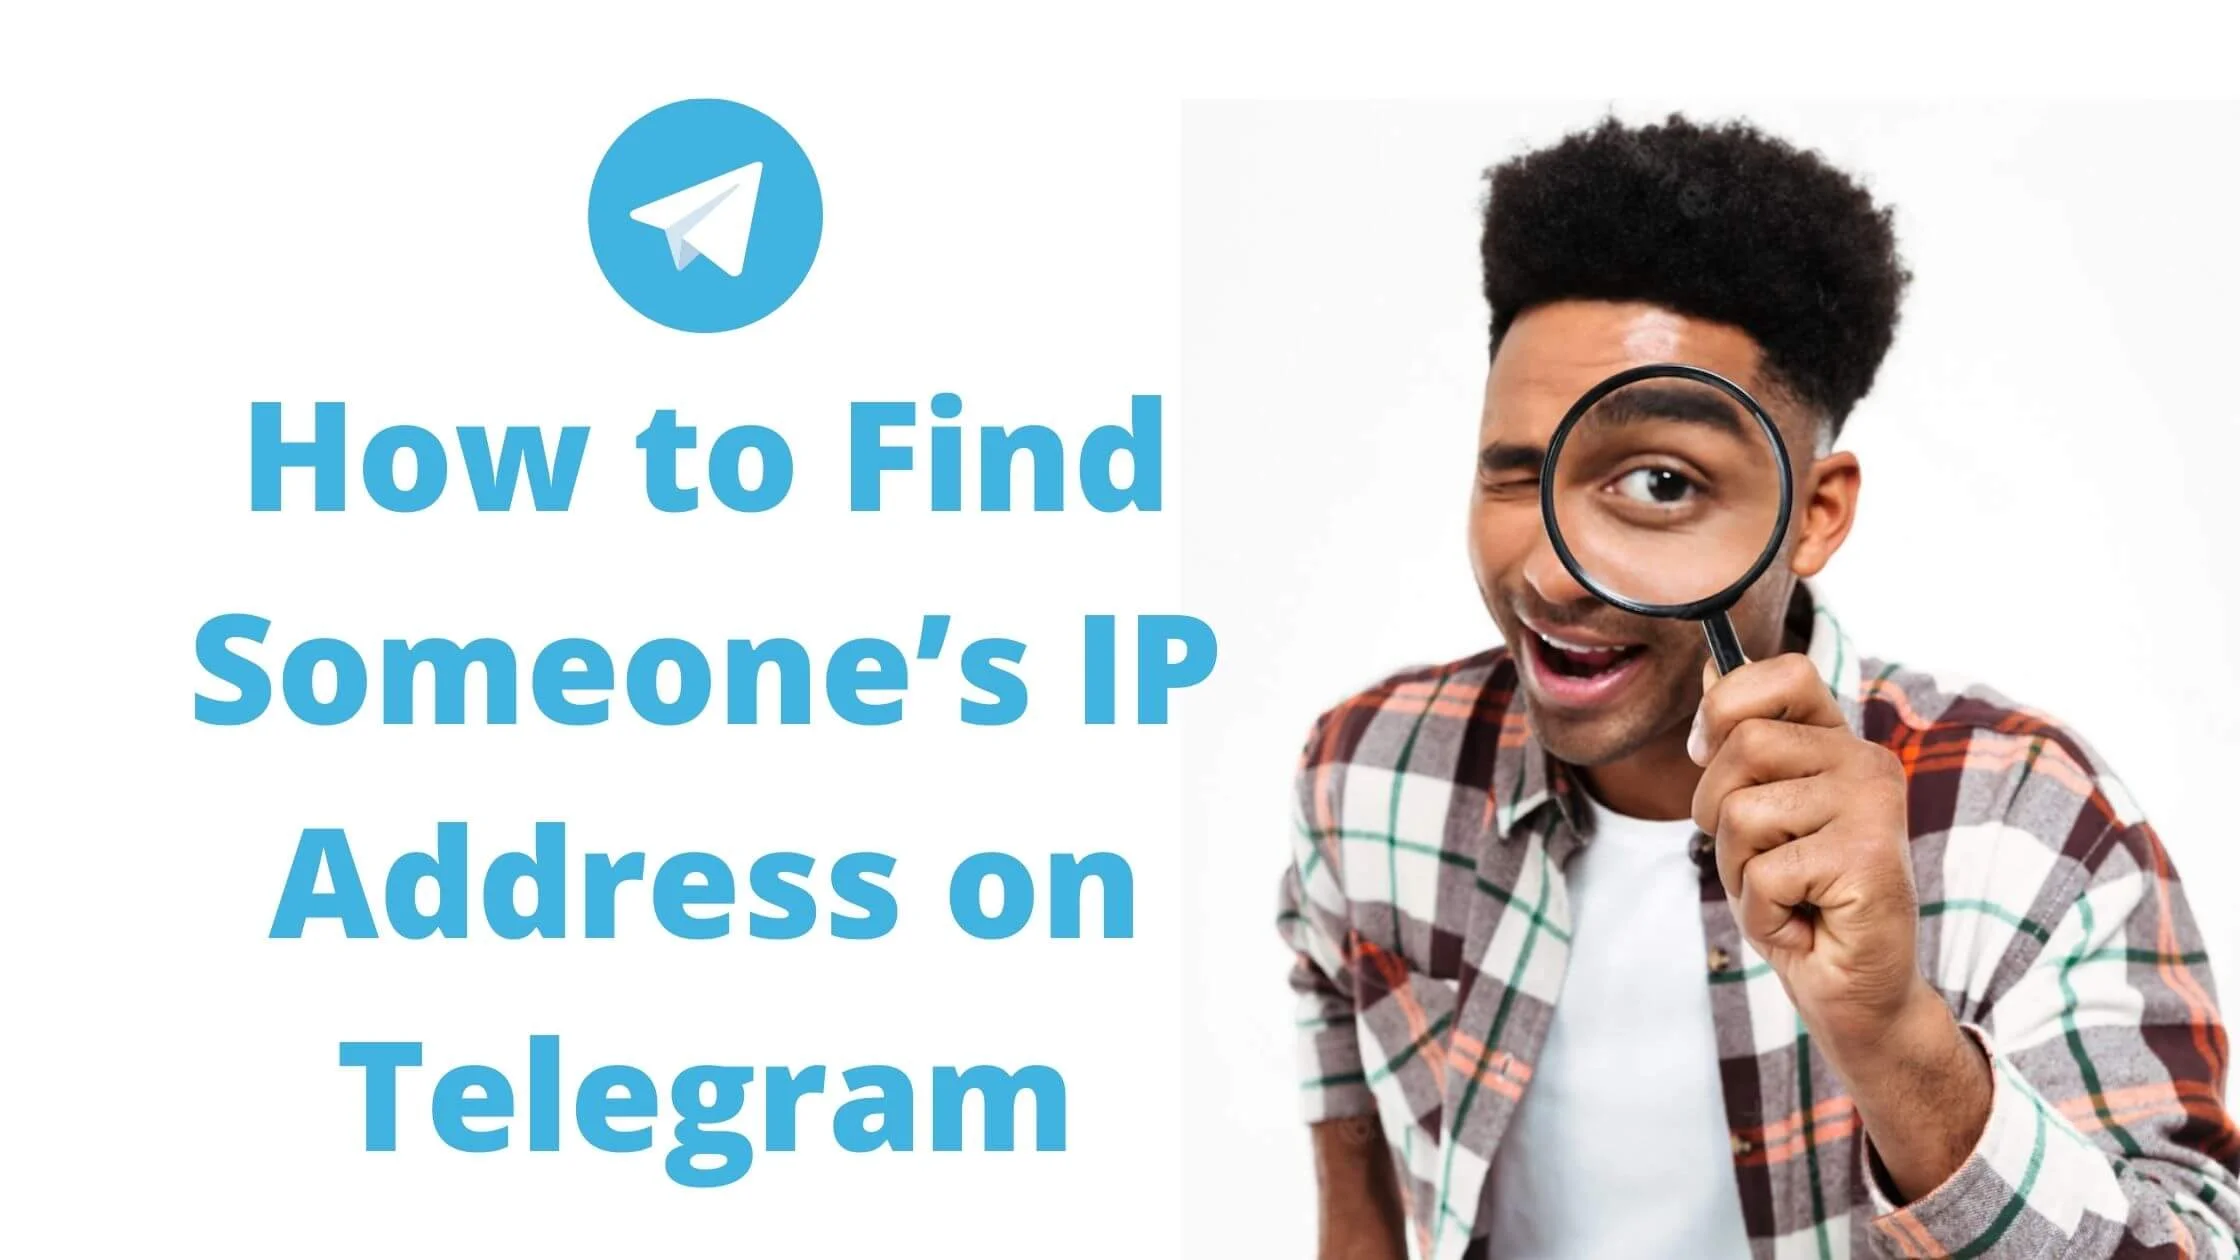 How to Find Someone’s IP Address on Telegram